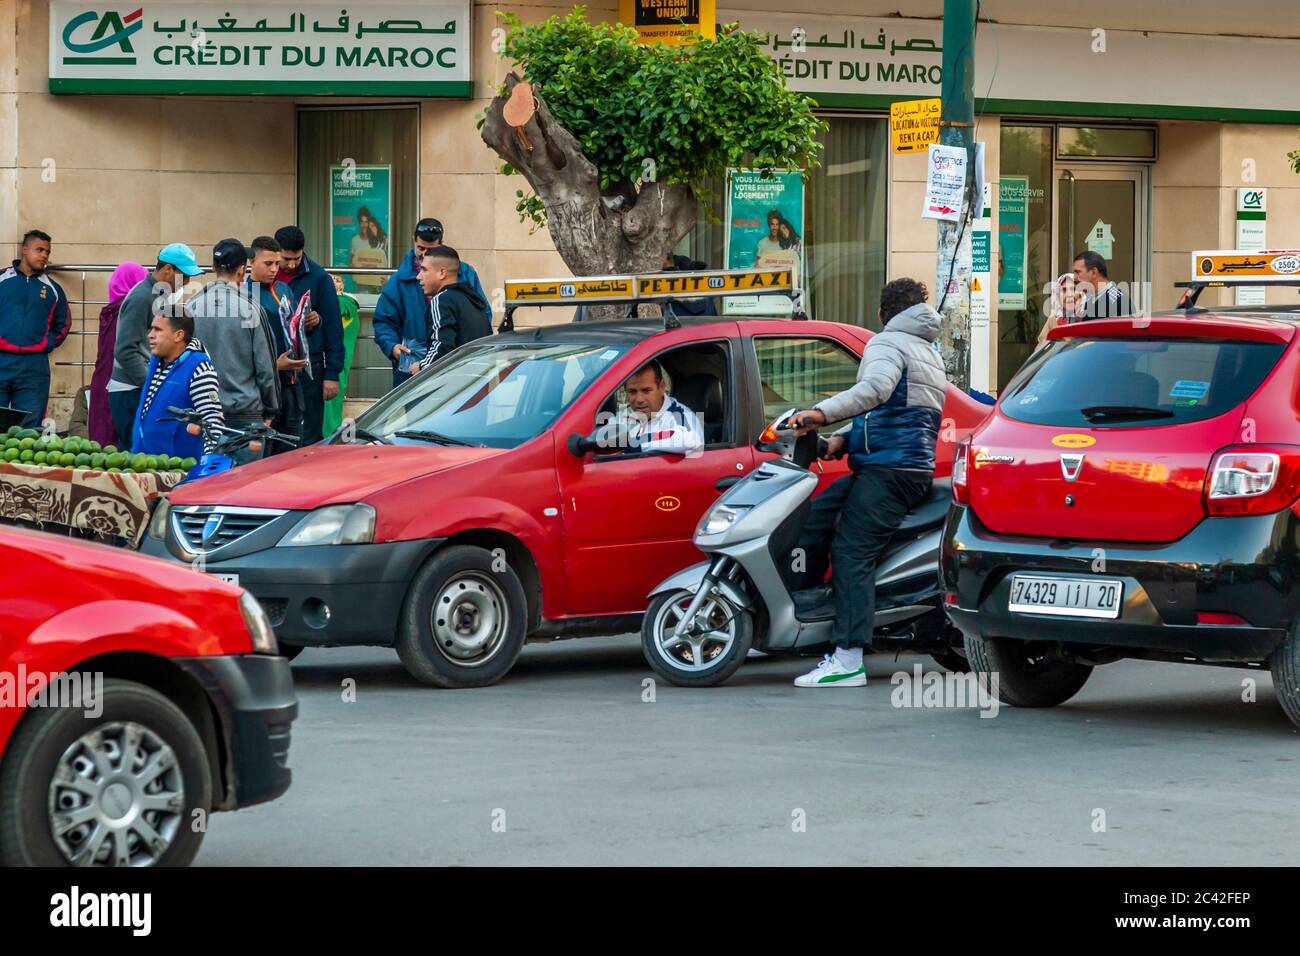 The red petit taxis are the cheapest means of transport in Fez, Morocco Stock Photo